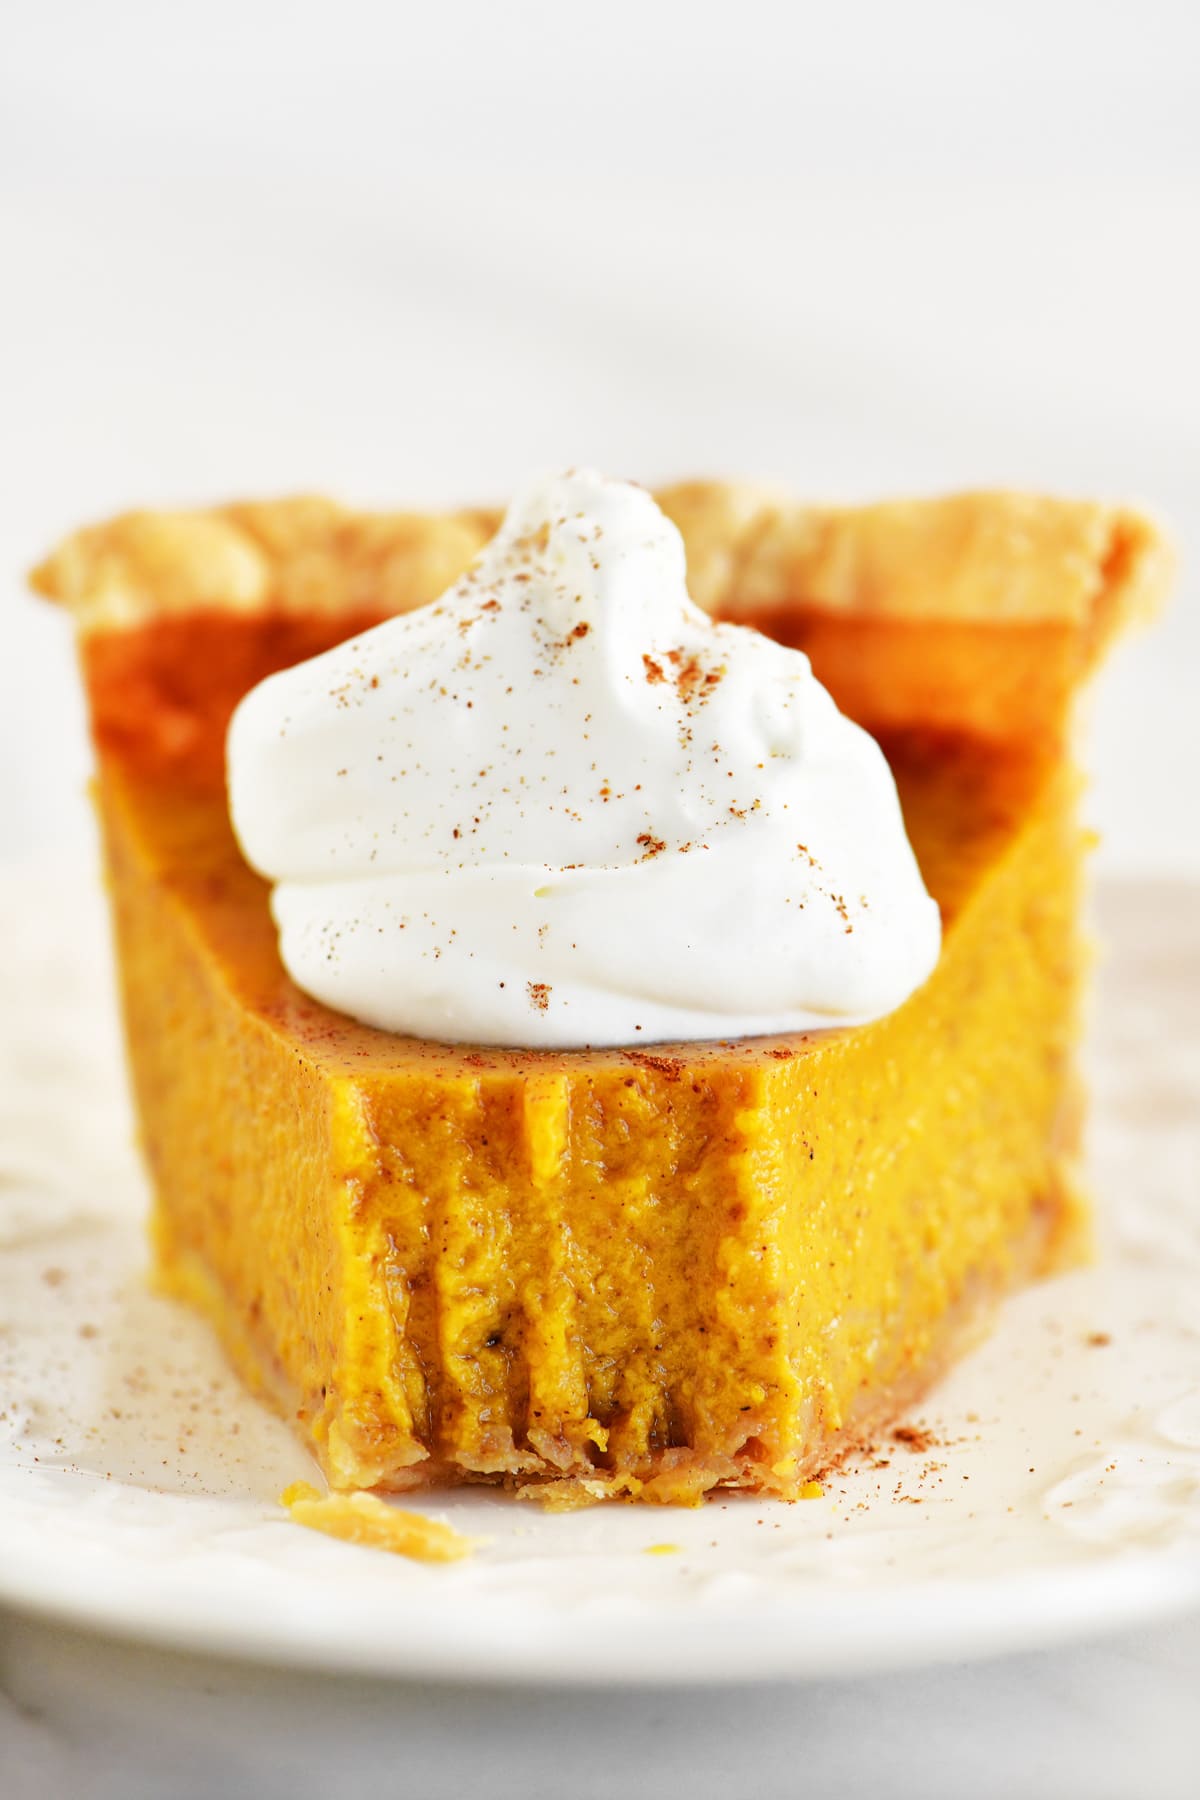 A slice of pumpkin pie with condensed milk on a white plate.